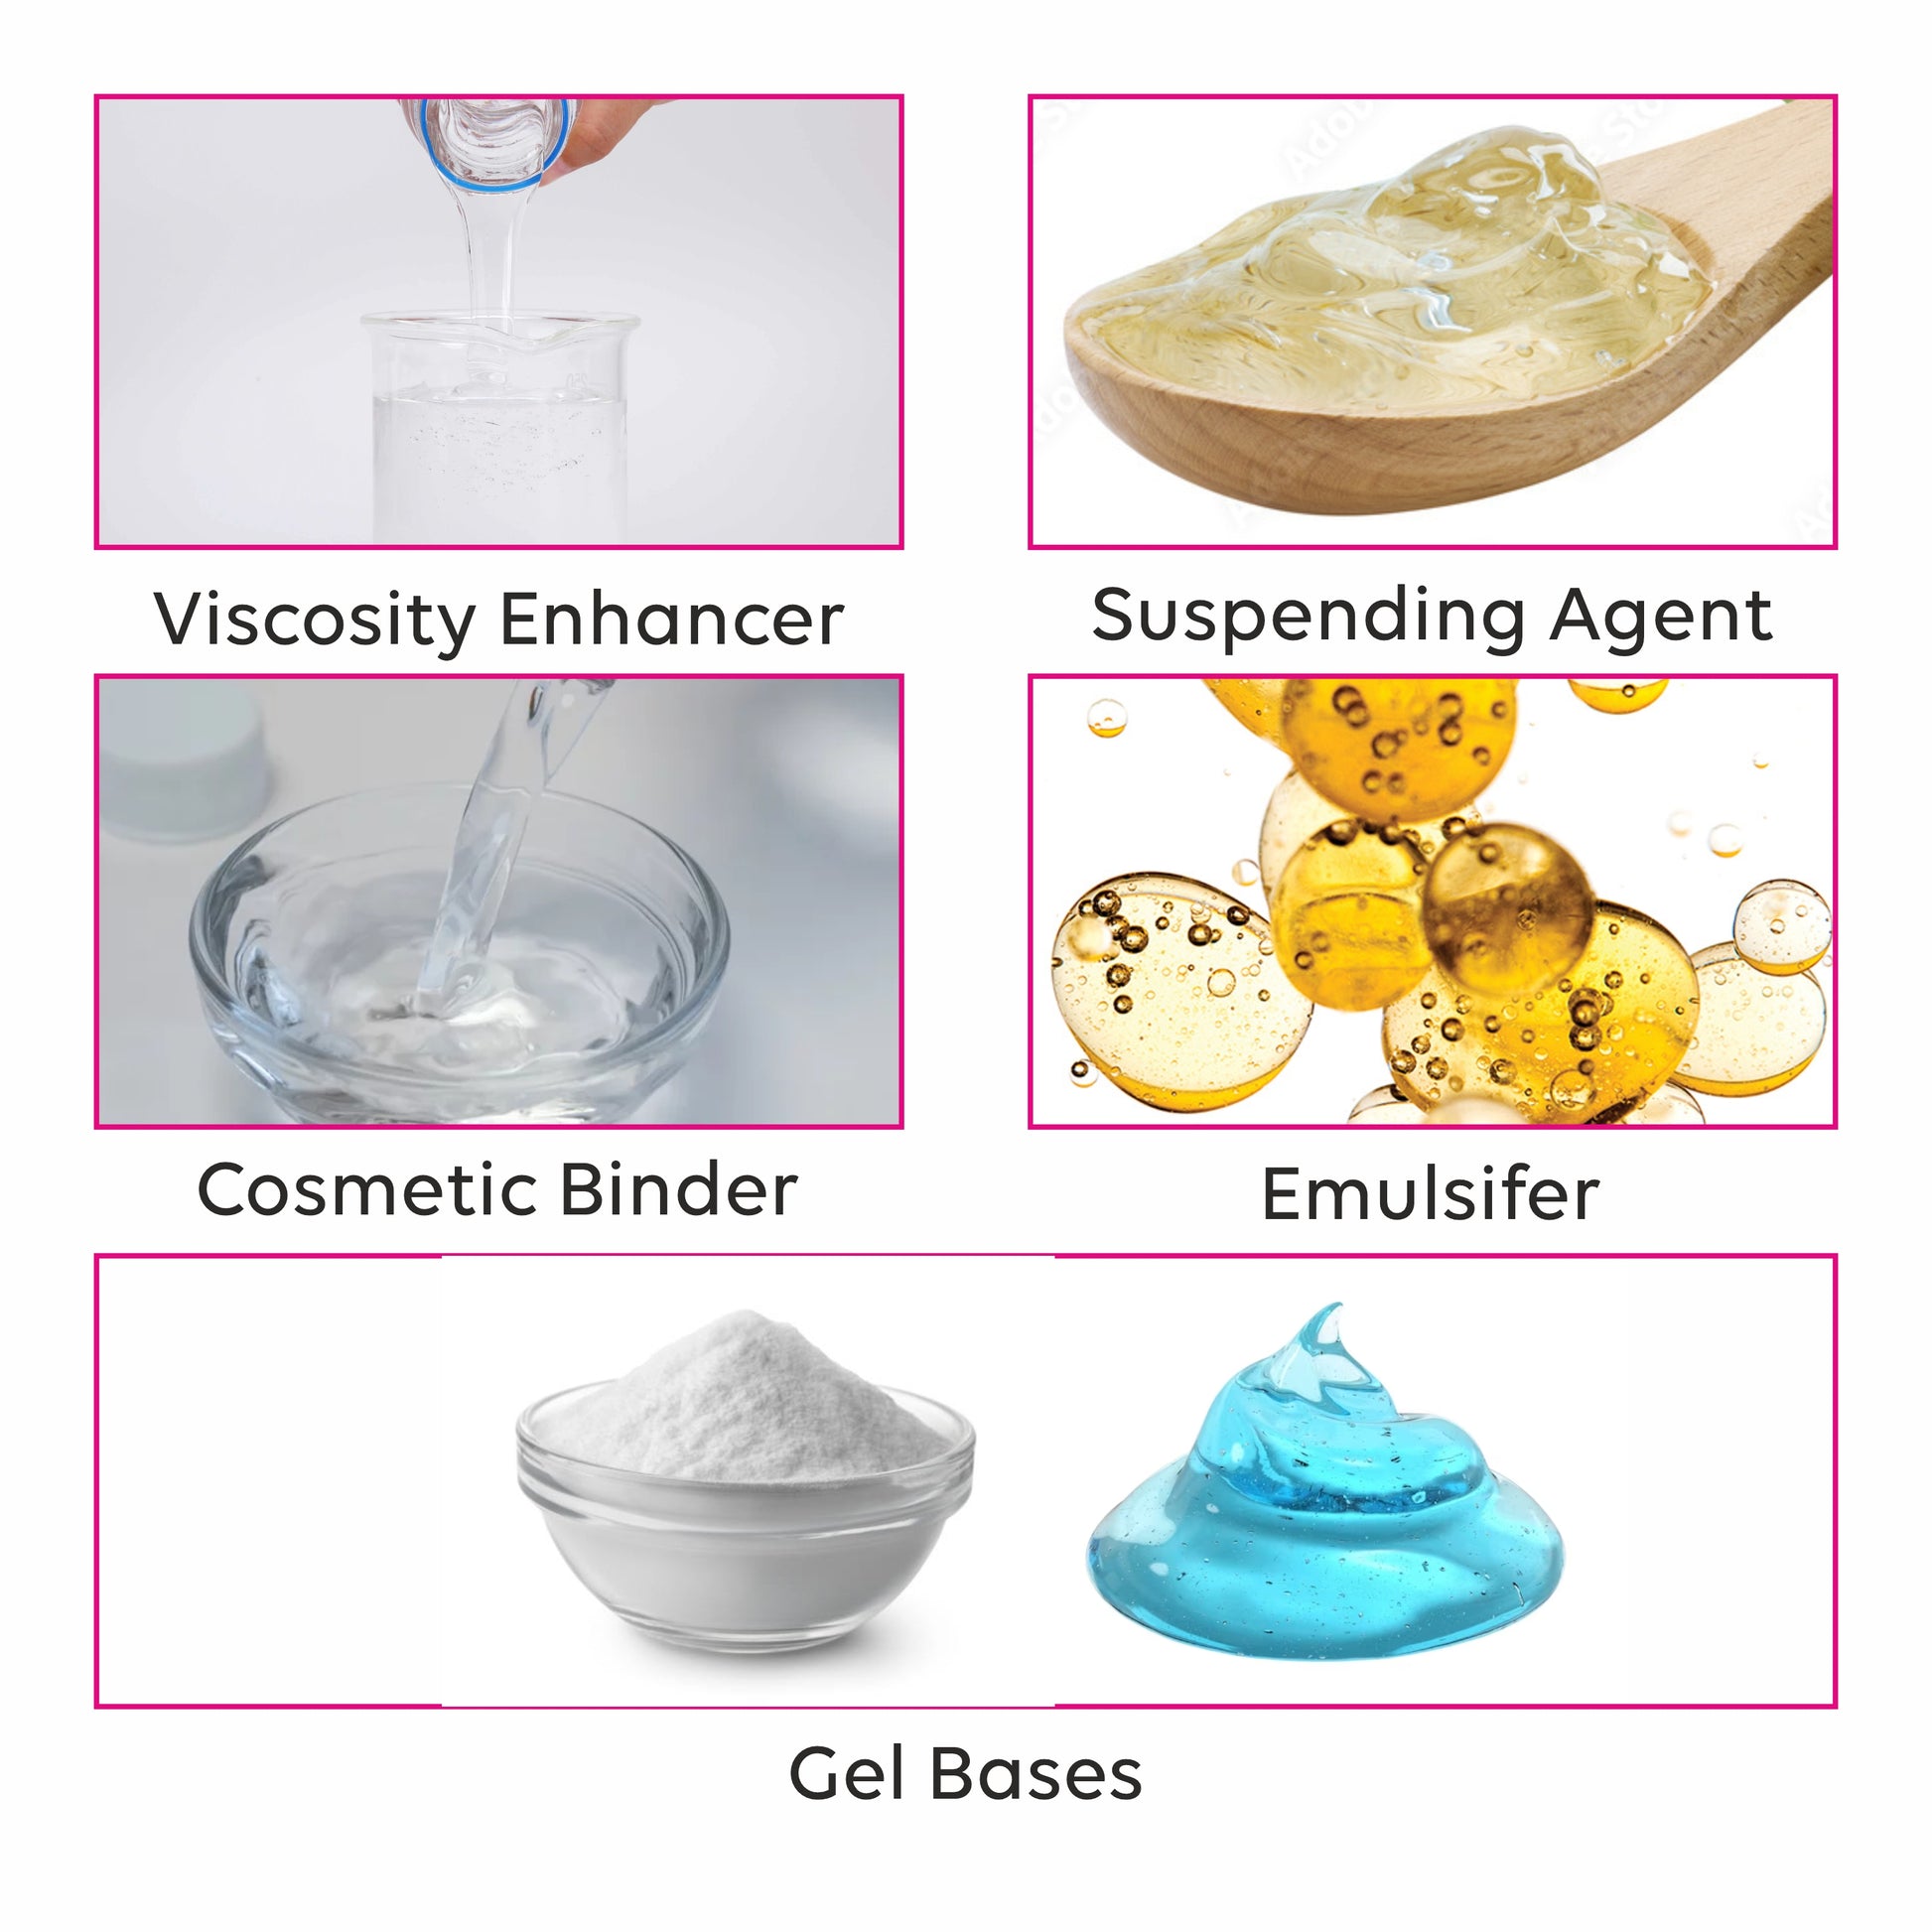 cosmeticmaking, saopmaking, cosmeticmakingingredients, soapmakingingredients,cosmeticingredients,naturalingredients,organicingredients,veganingredients, essentialoils,fragranceoils,carrieroils, carrieroils, butters, clays,botanicals,herbs,preservatives,emulsifiers,surfa ctants,thickeners, thickeners,exfoliants,